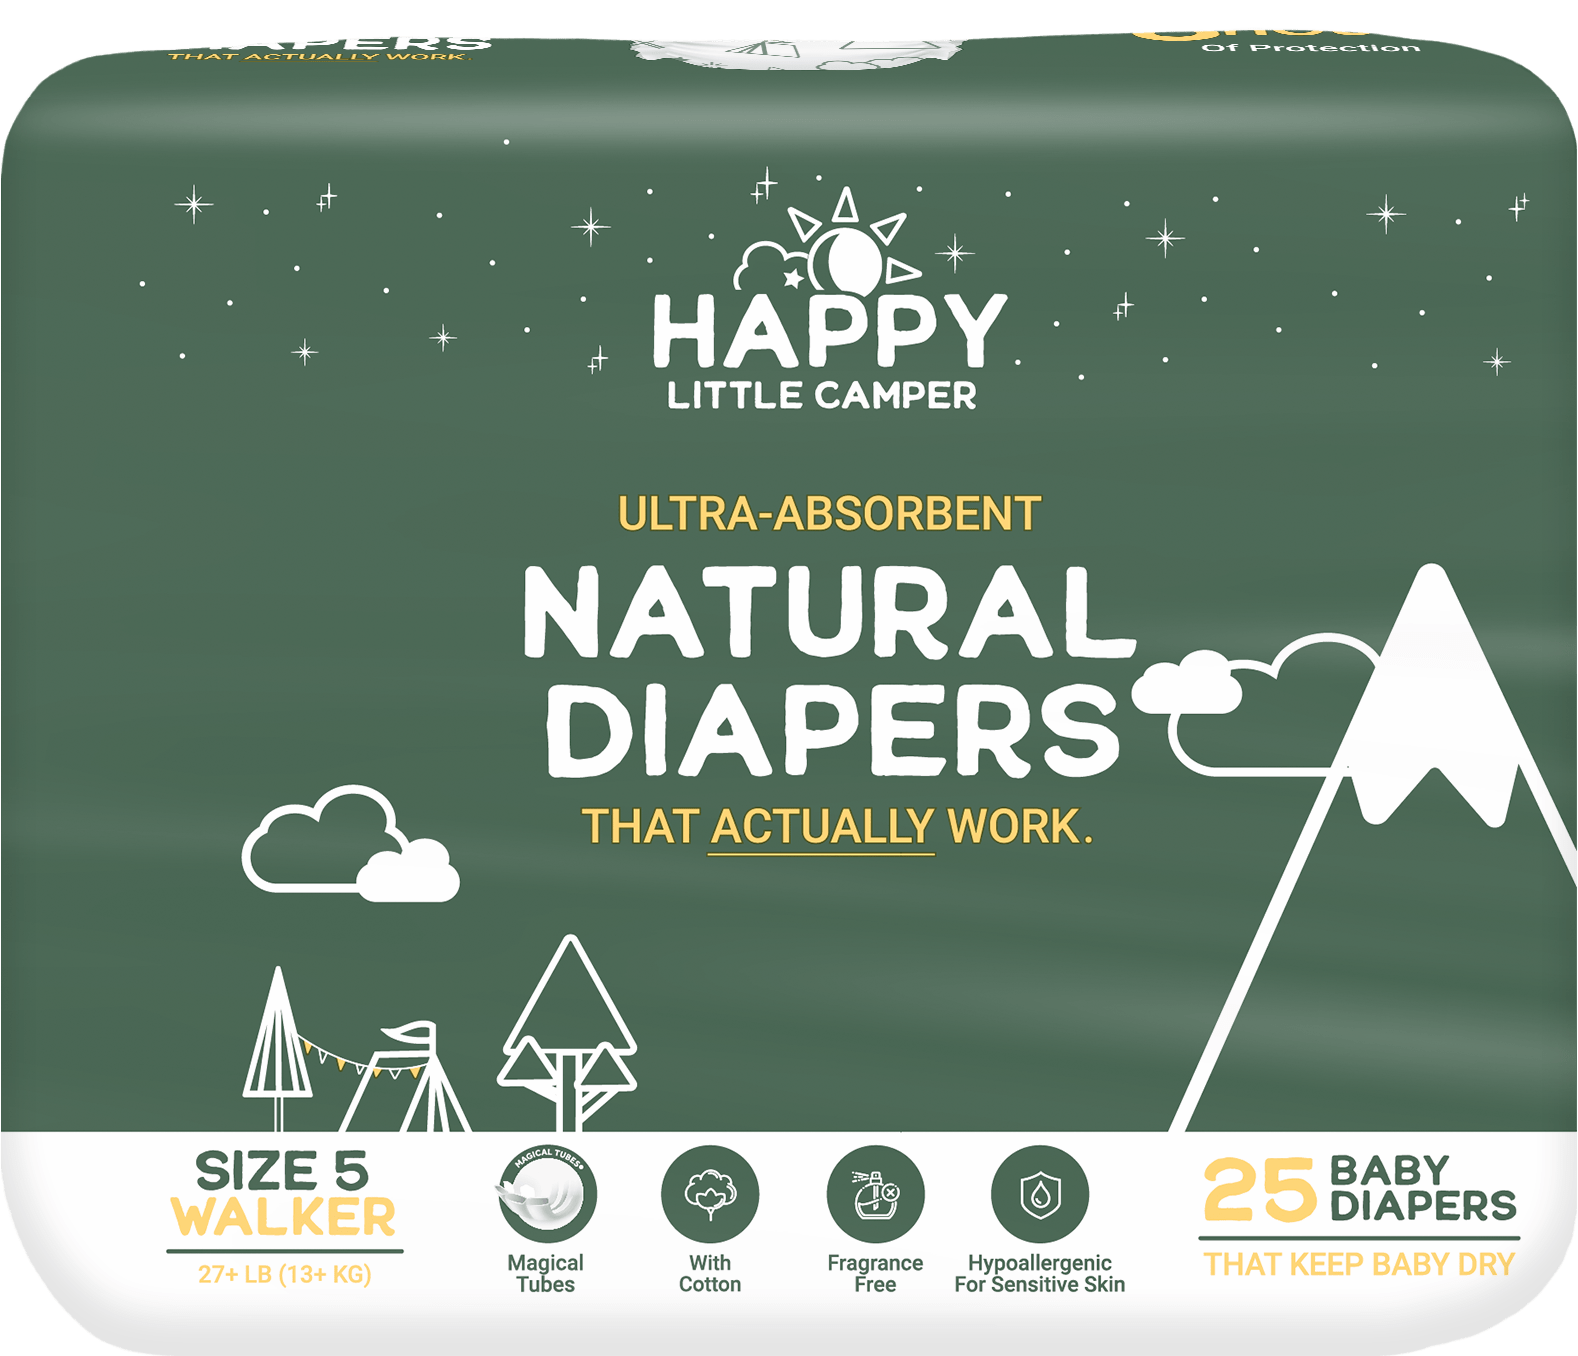 Happy Little Camper Diapers 25 Size 5 Ultra-Absorbent Natural Baby Diapers Happy Little Camper